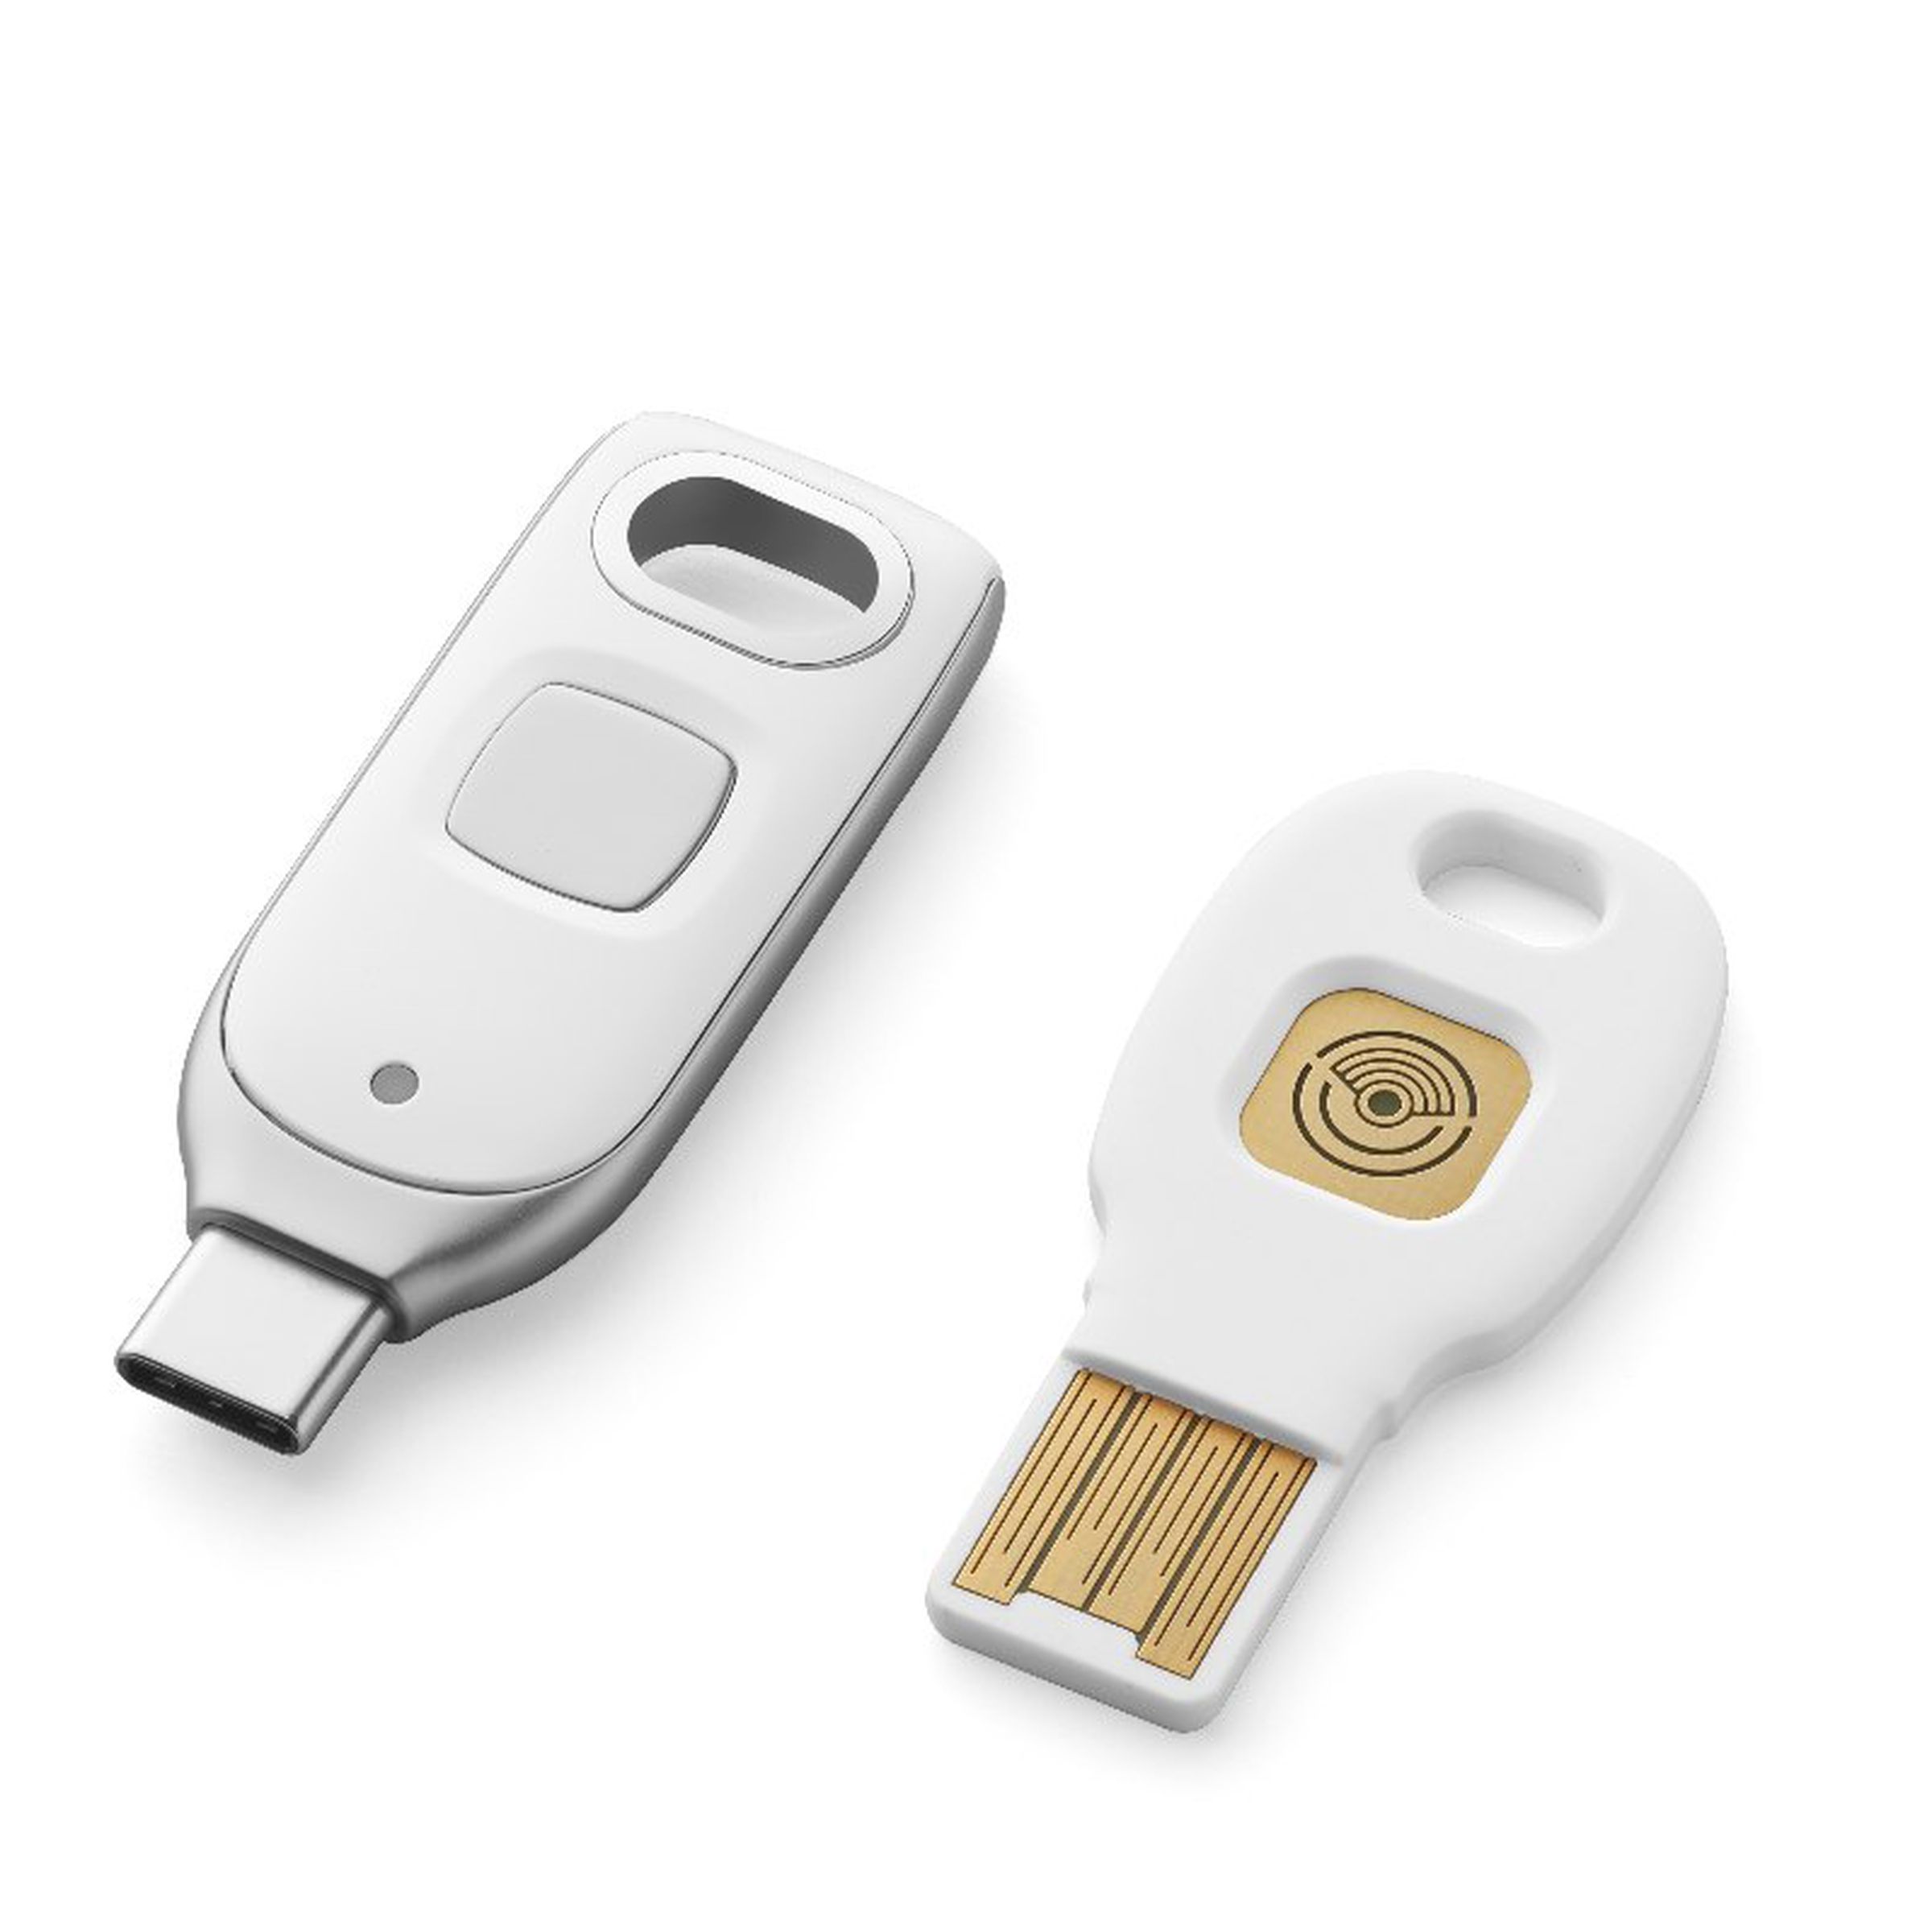 Two cryptographic security keys, one USB-C and one USB-A on a white background.